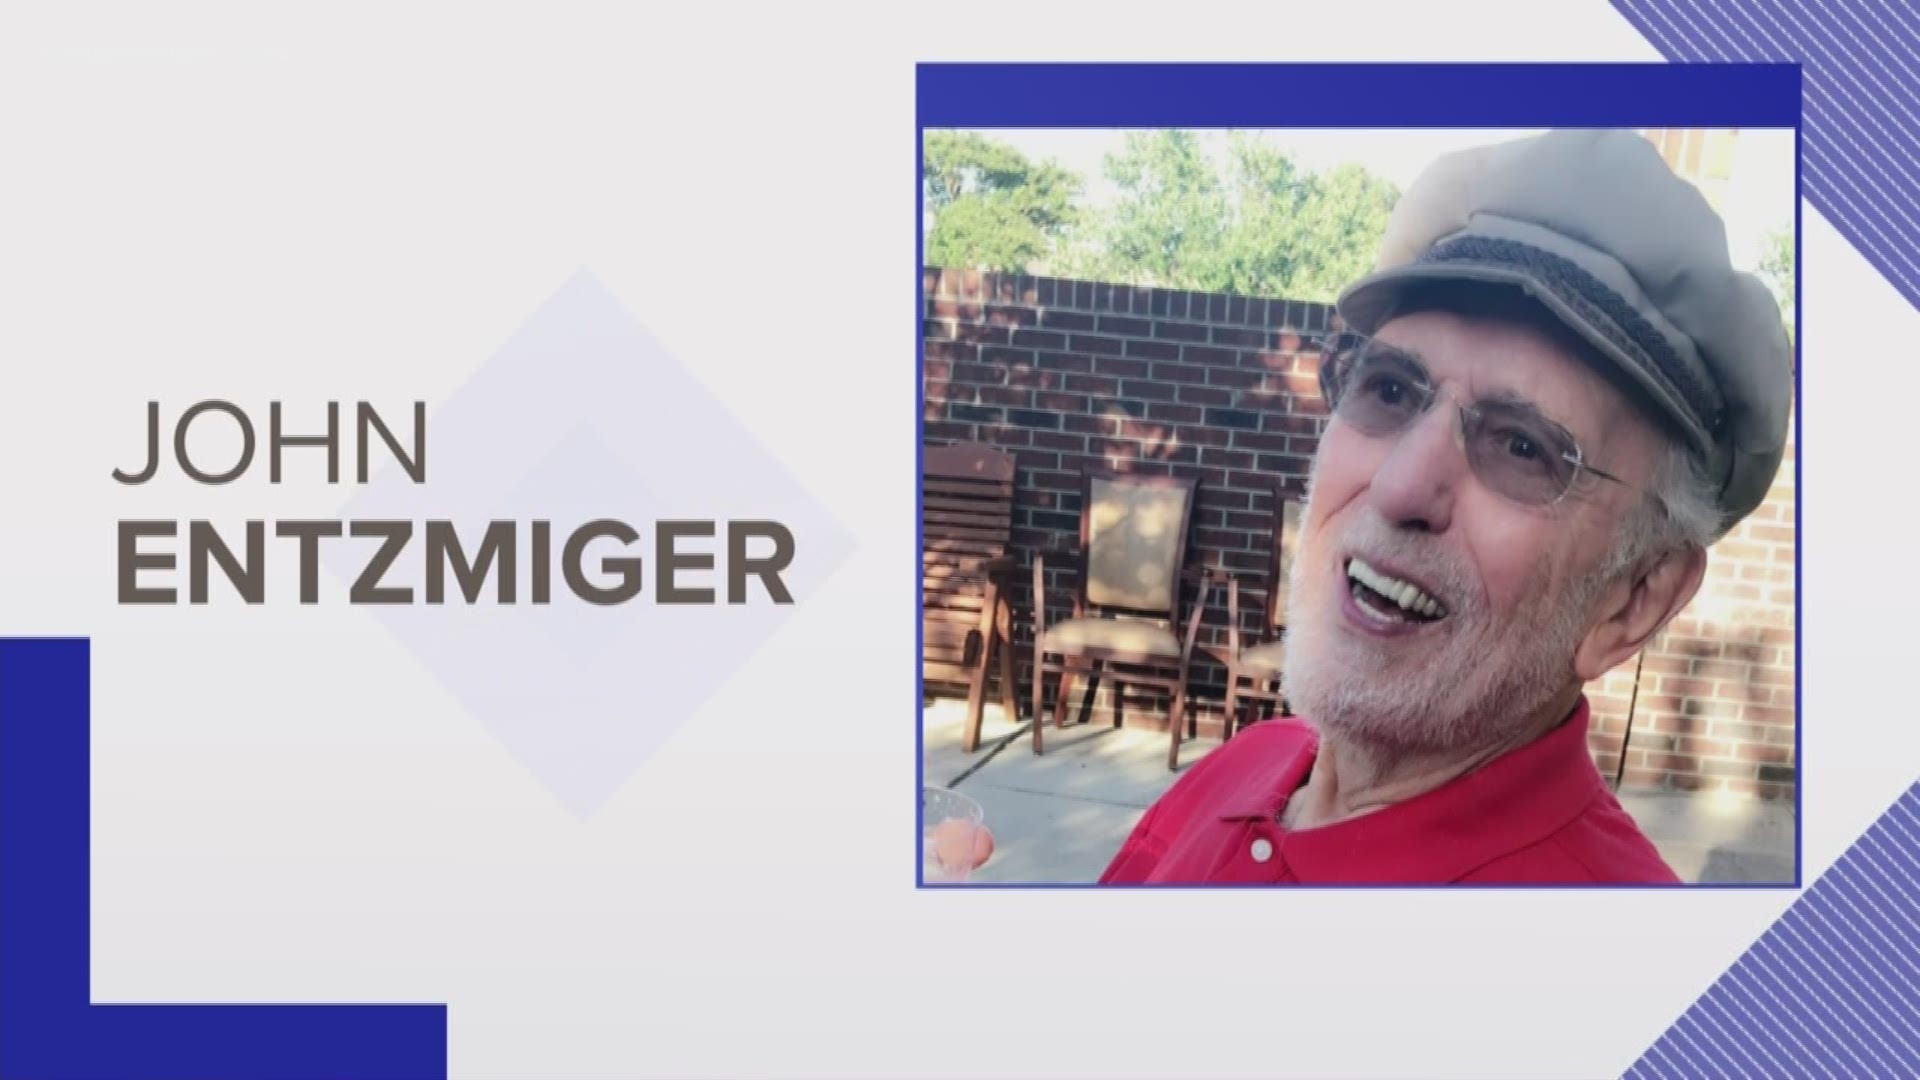 Virginia Beach police are looking for a missing 81-year-old man, John Entzmiger, who suffers from dementia.